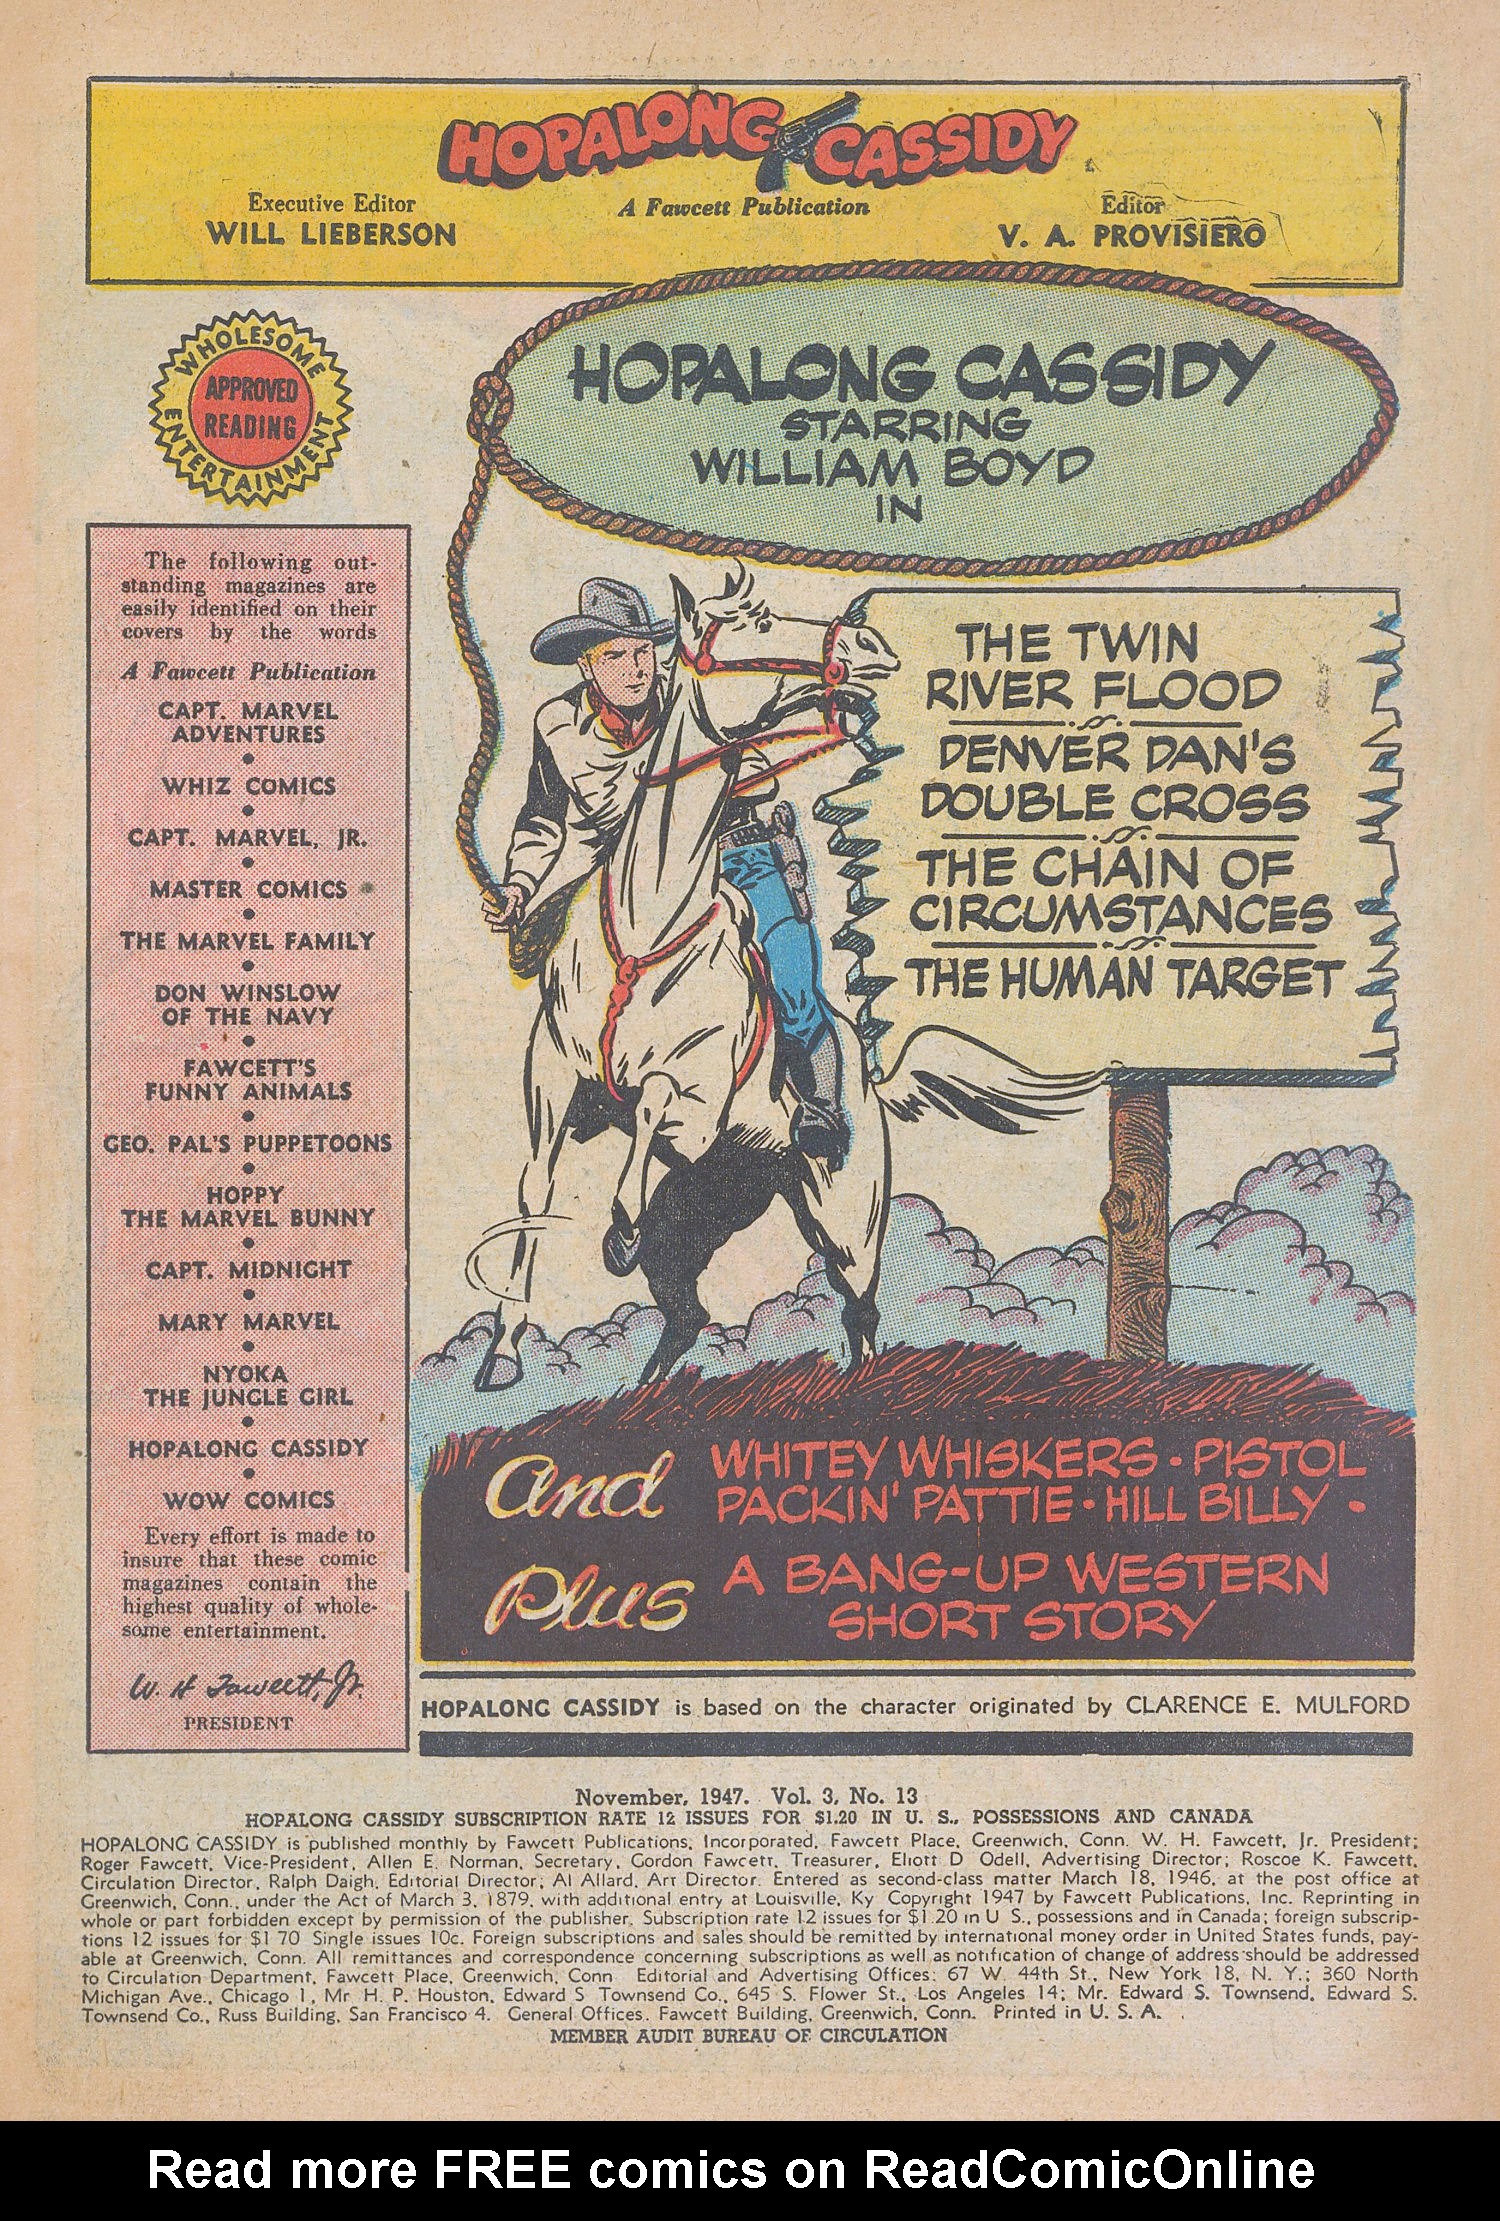 Read online Hopalong Cassidy comic -  Issue #13 - 3